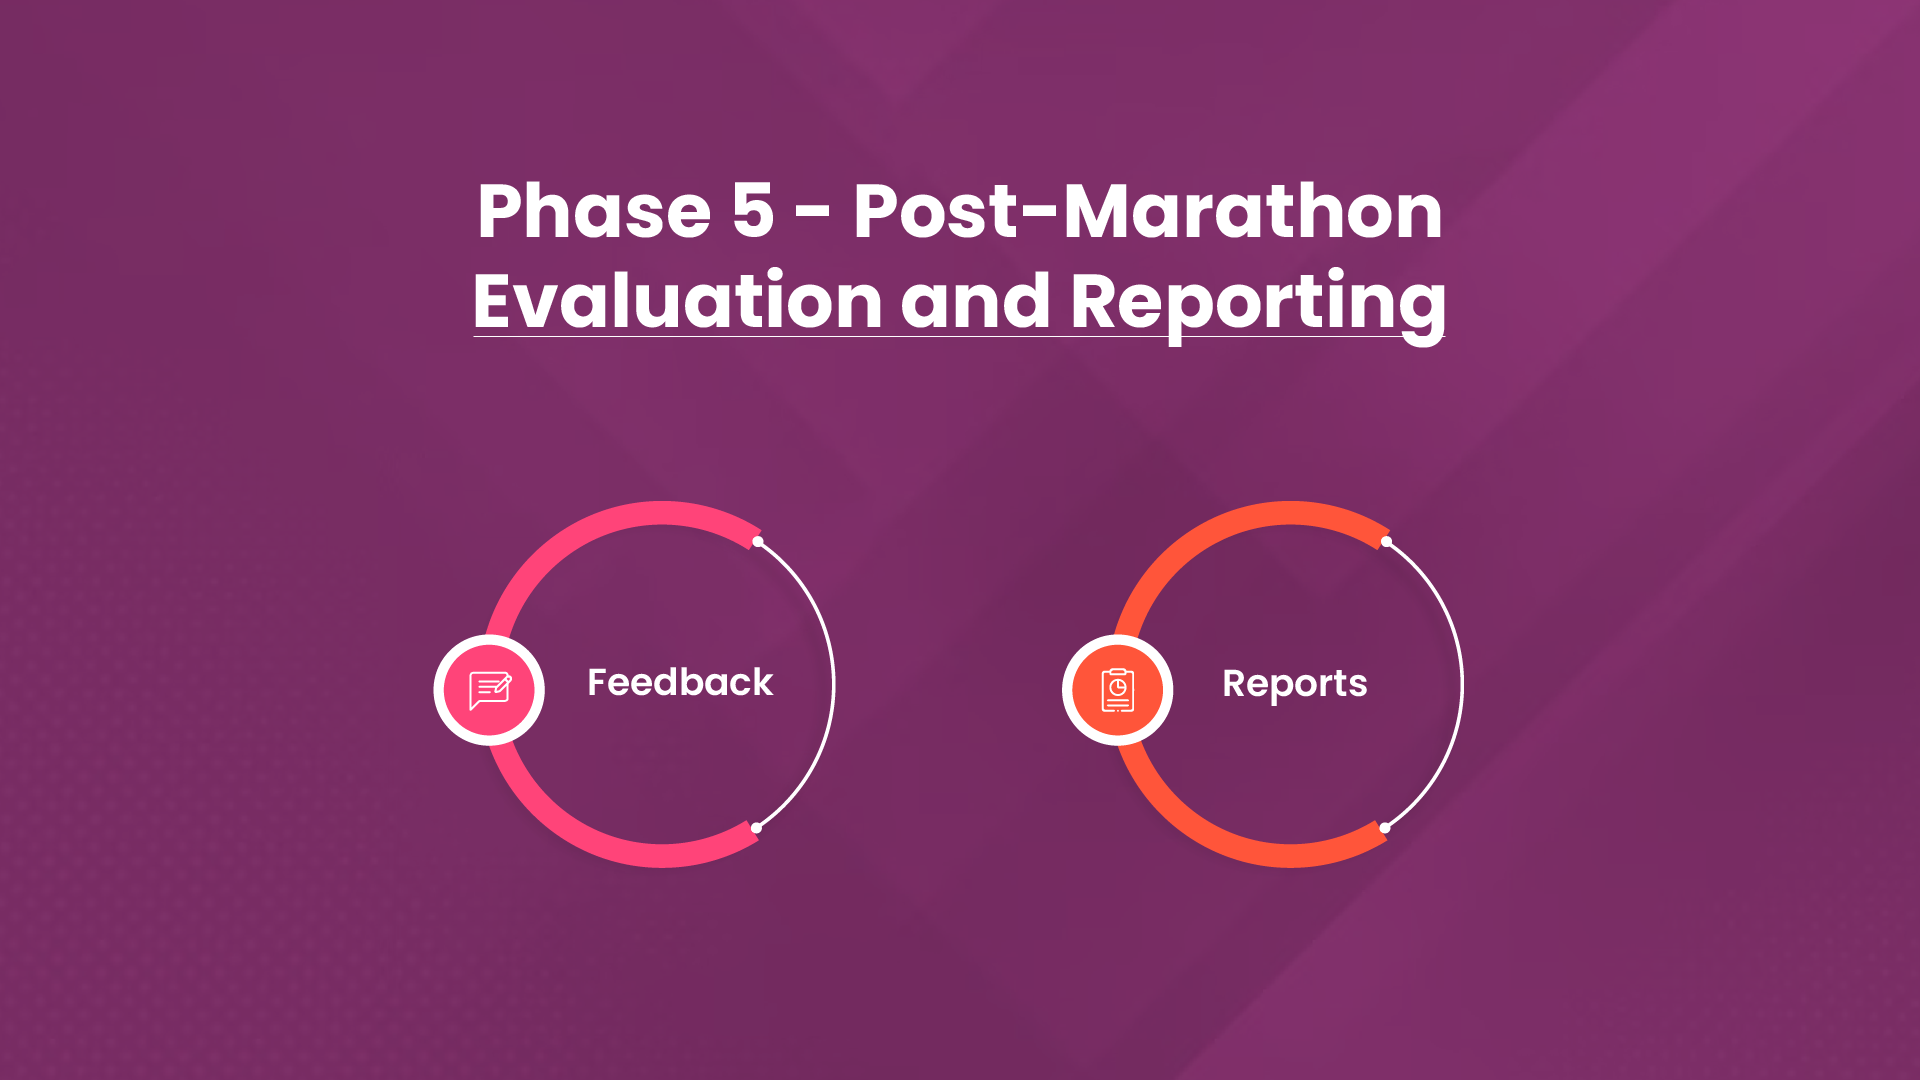 Phase 5: Post-Marathon Evaluation and Reporting